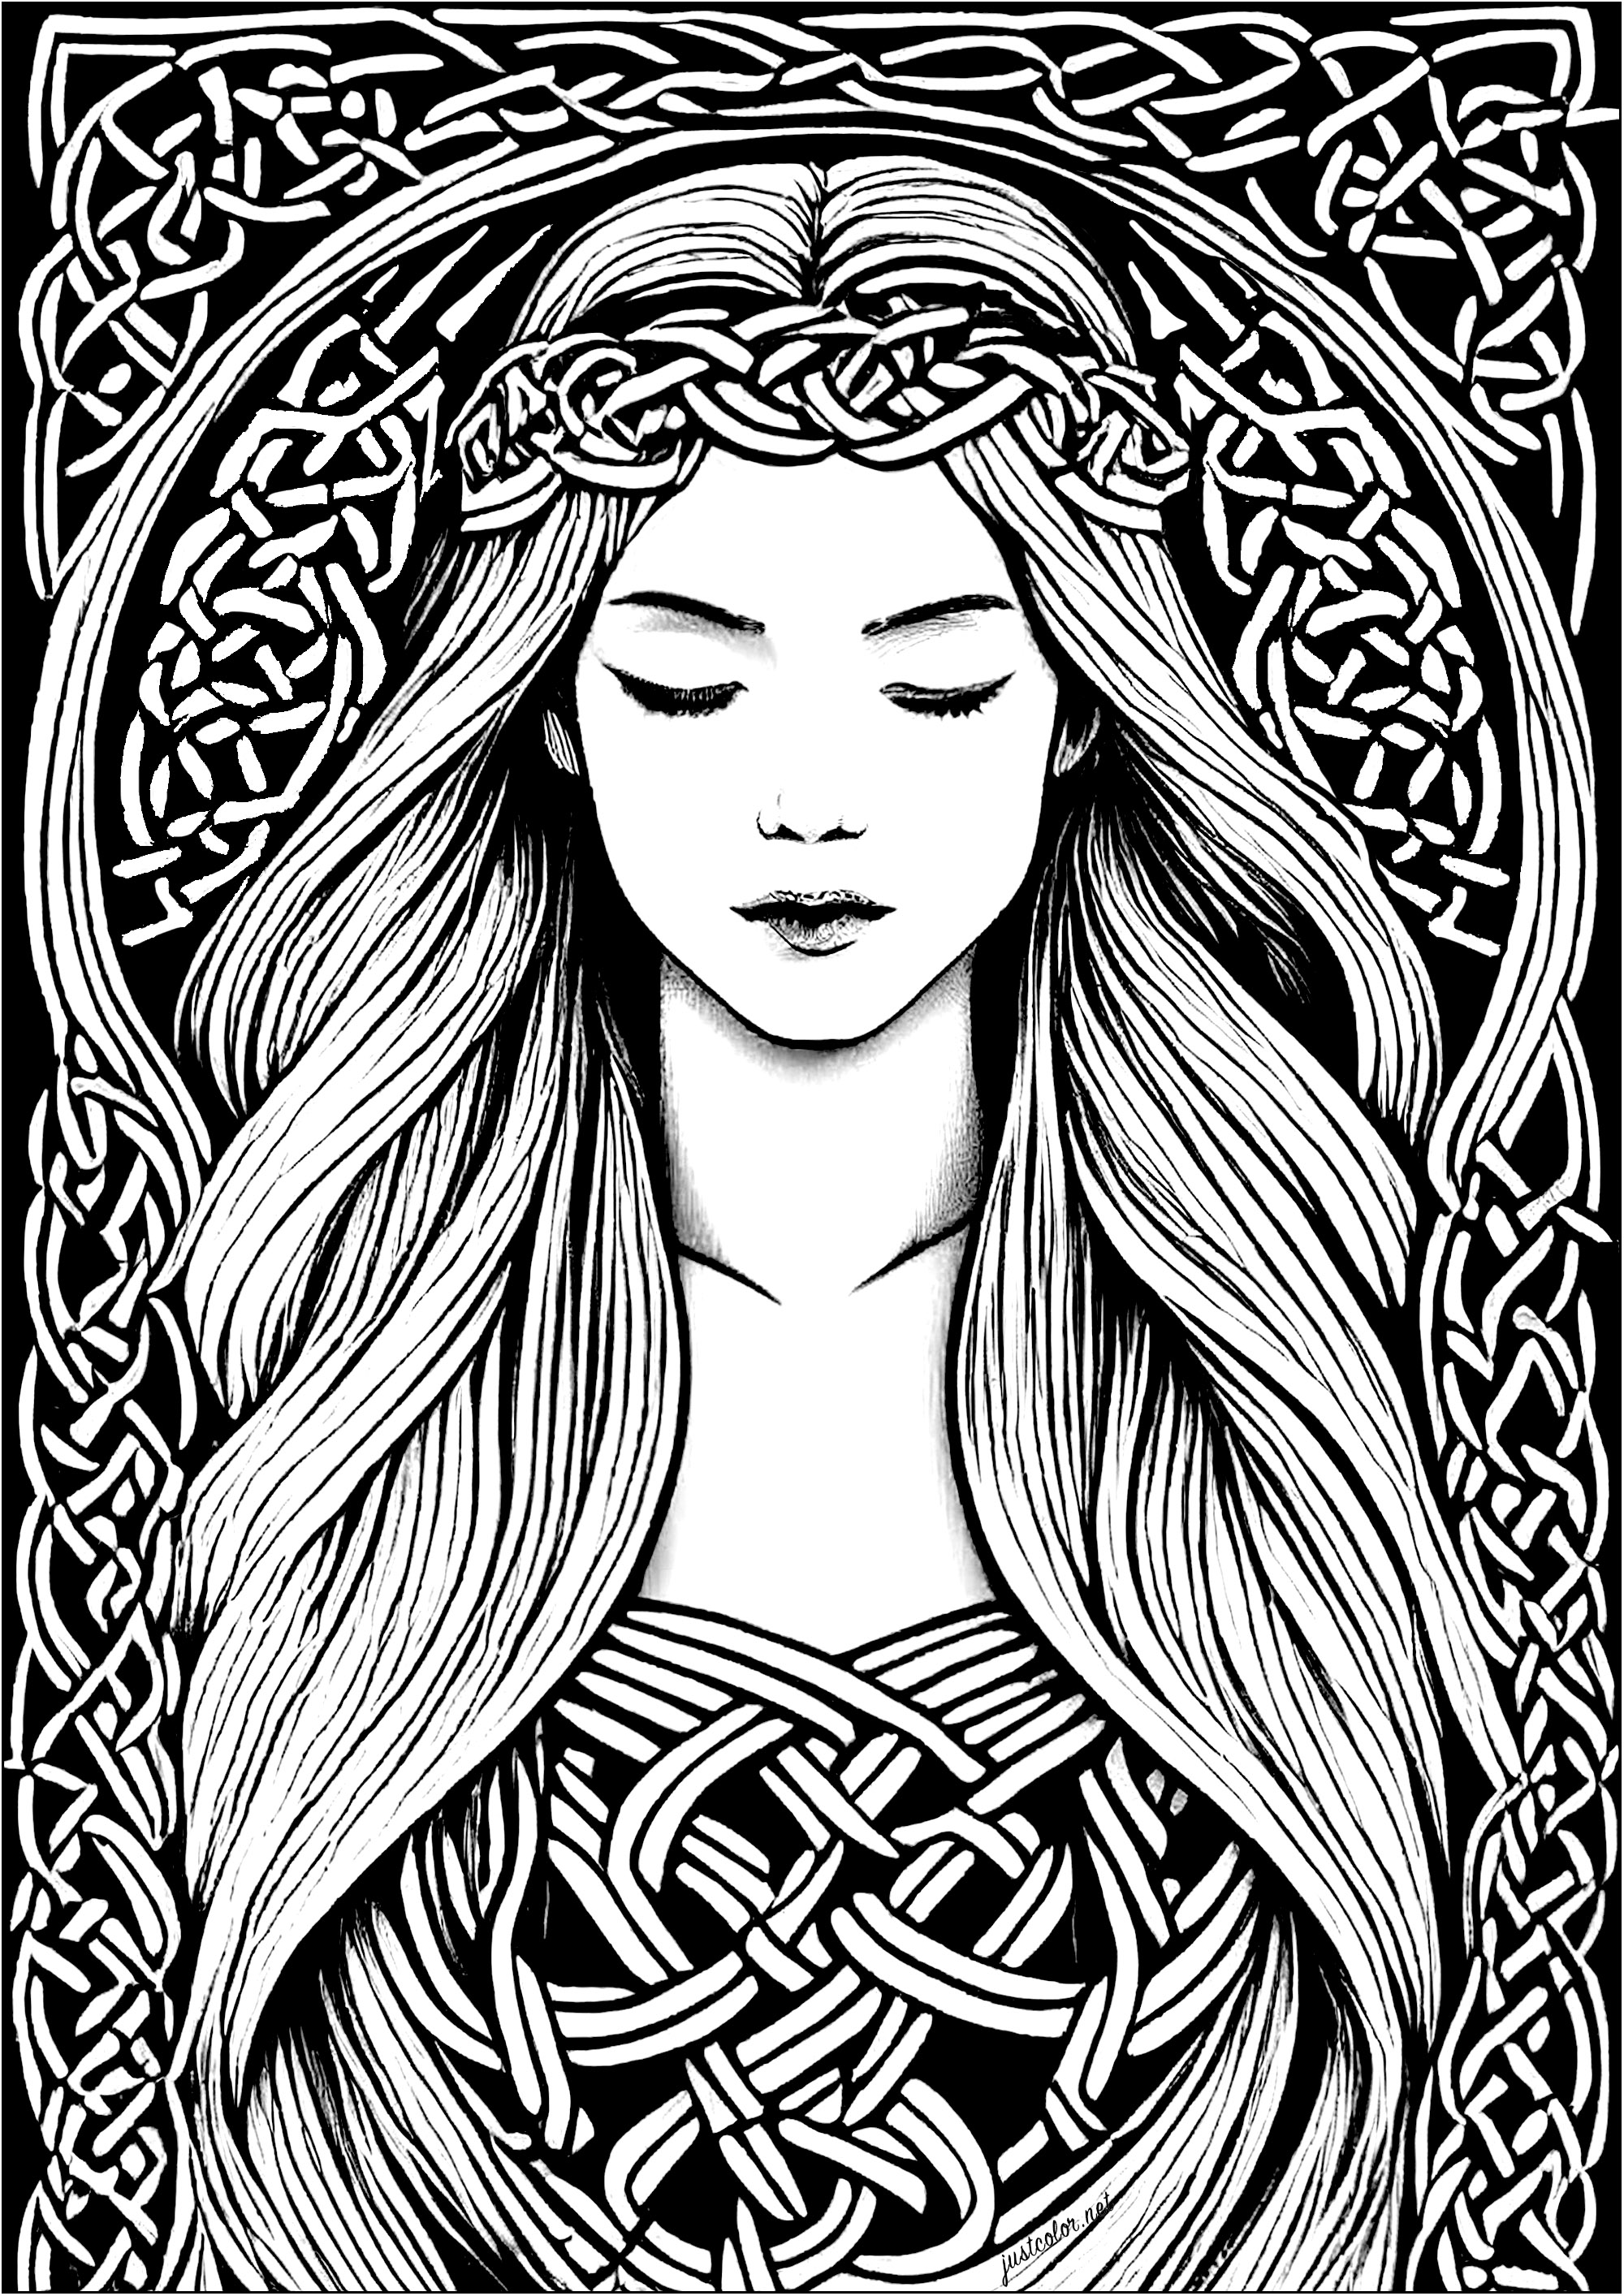 Coloring page of a sleeping young woman, inspired by Celtic art. The motifs present throughout this drawing are inspired by Celtic motifs, characterized by their intricacies and root-like plant shapes.